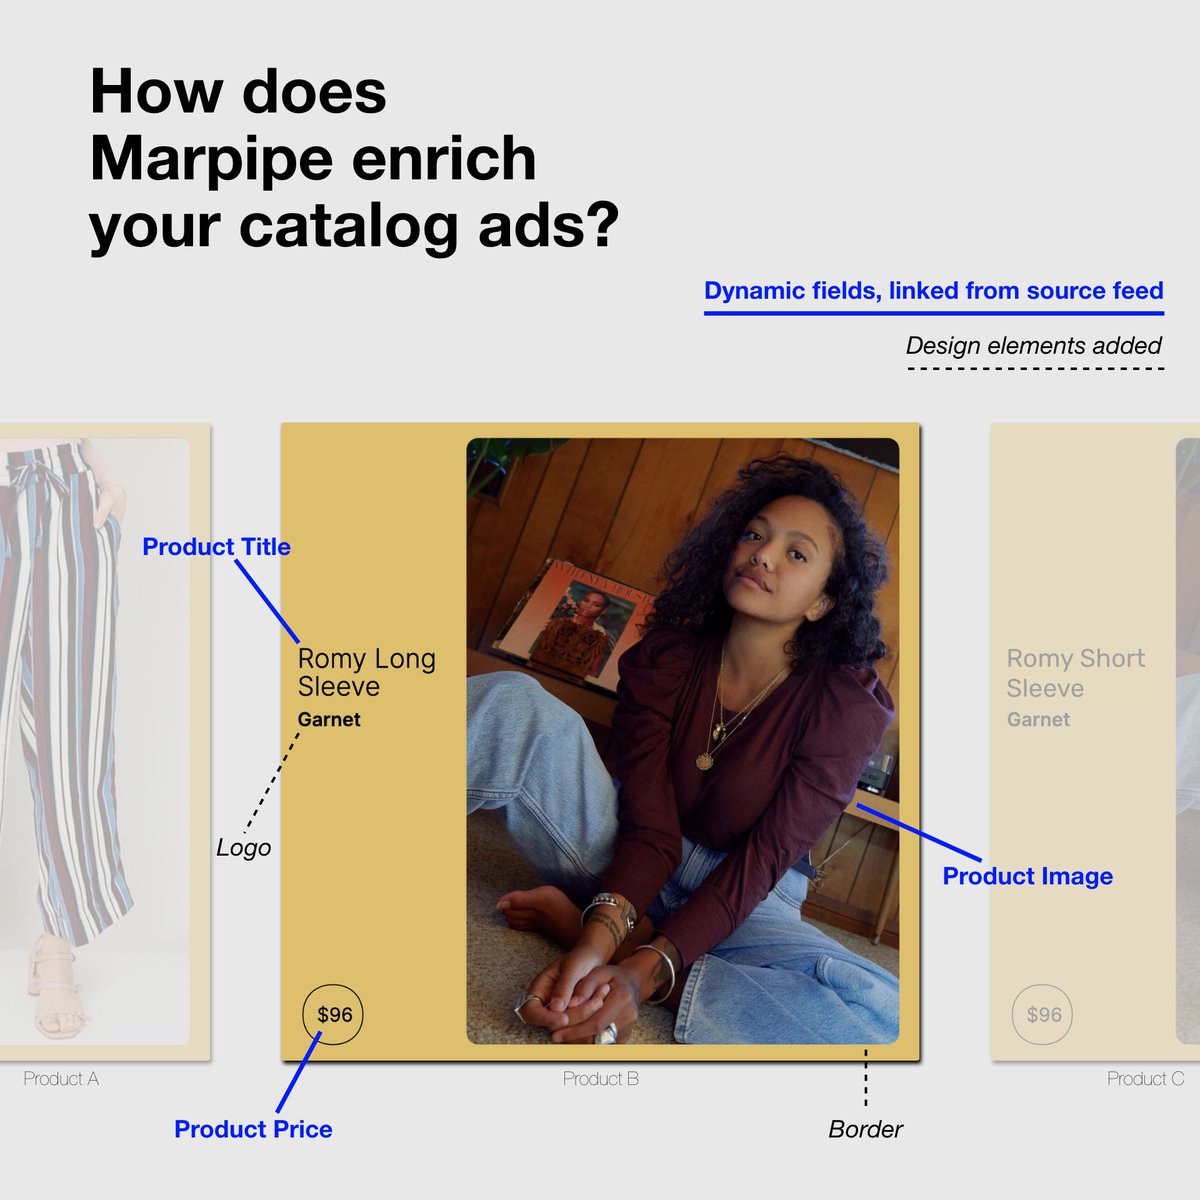 Enriched Catalogs turns your product feed into creative. Link fields in your feed to to layers in your creative, then add design elements to bring it altogether. Getting started is free and takes minutes, enriched your catalog ads now: bit.ly/3KbZWLg